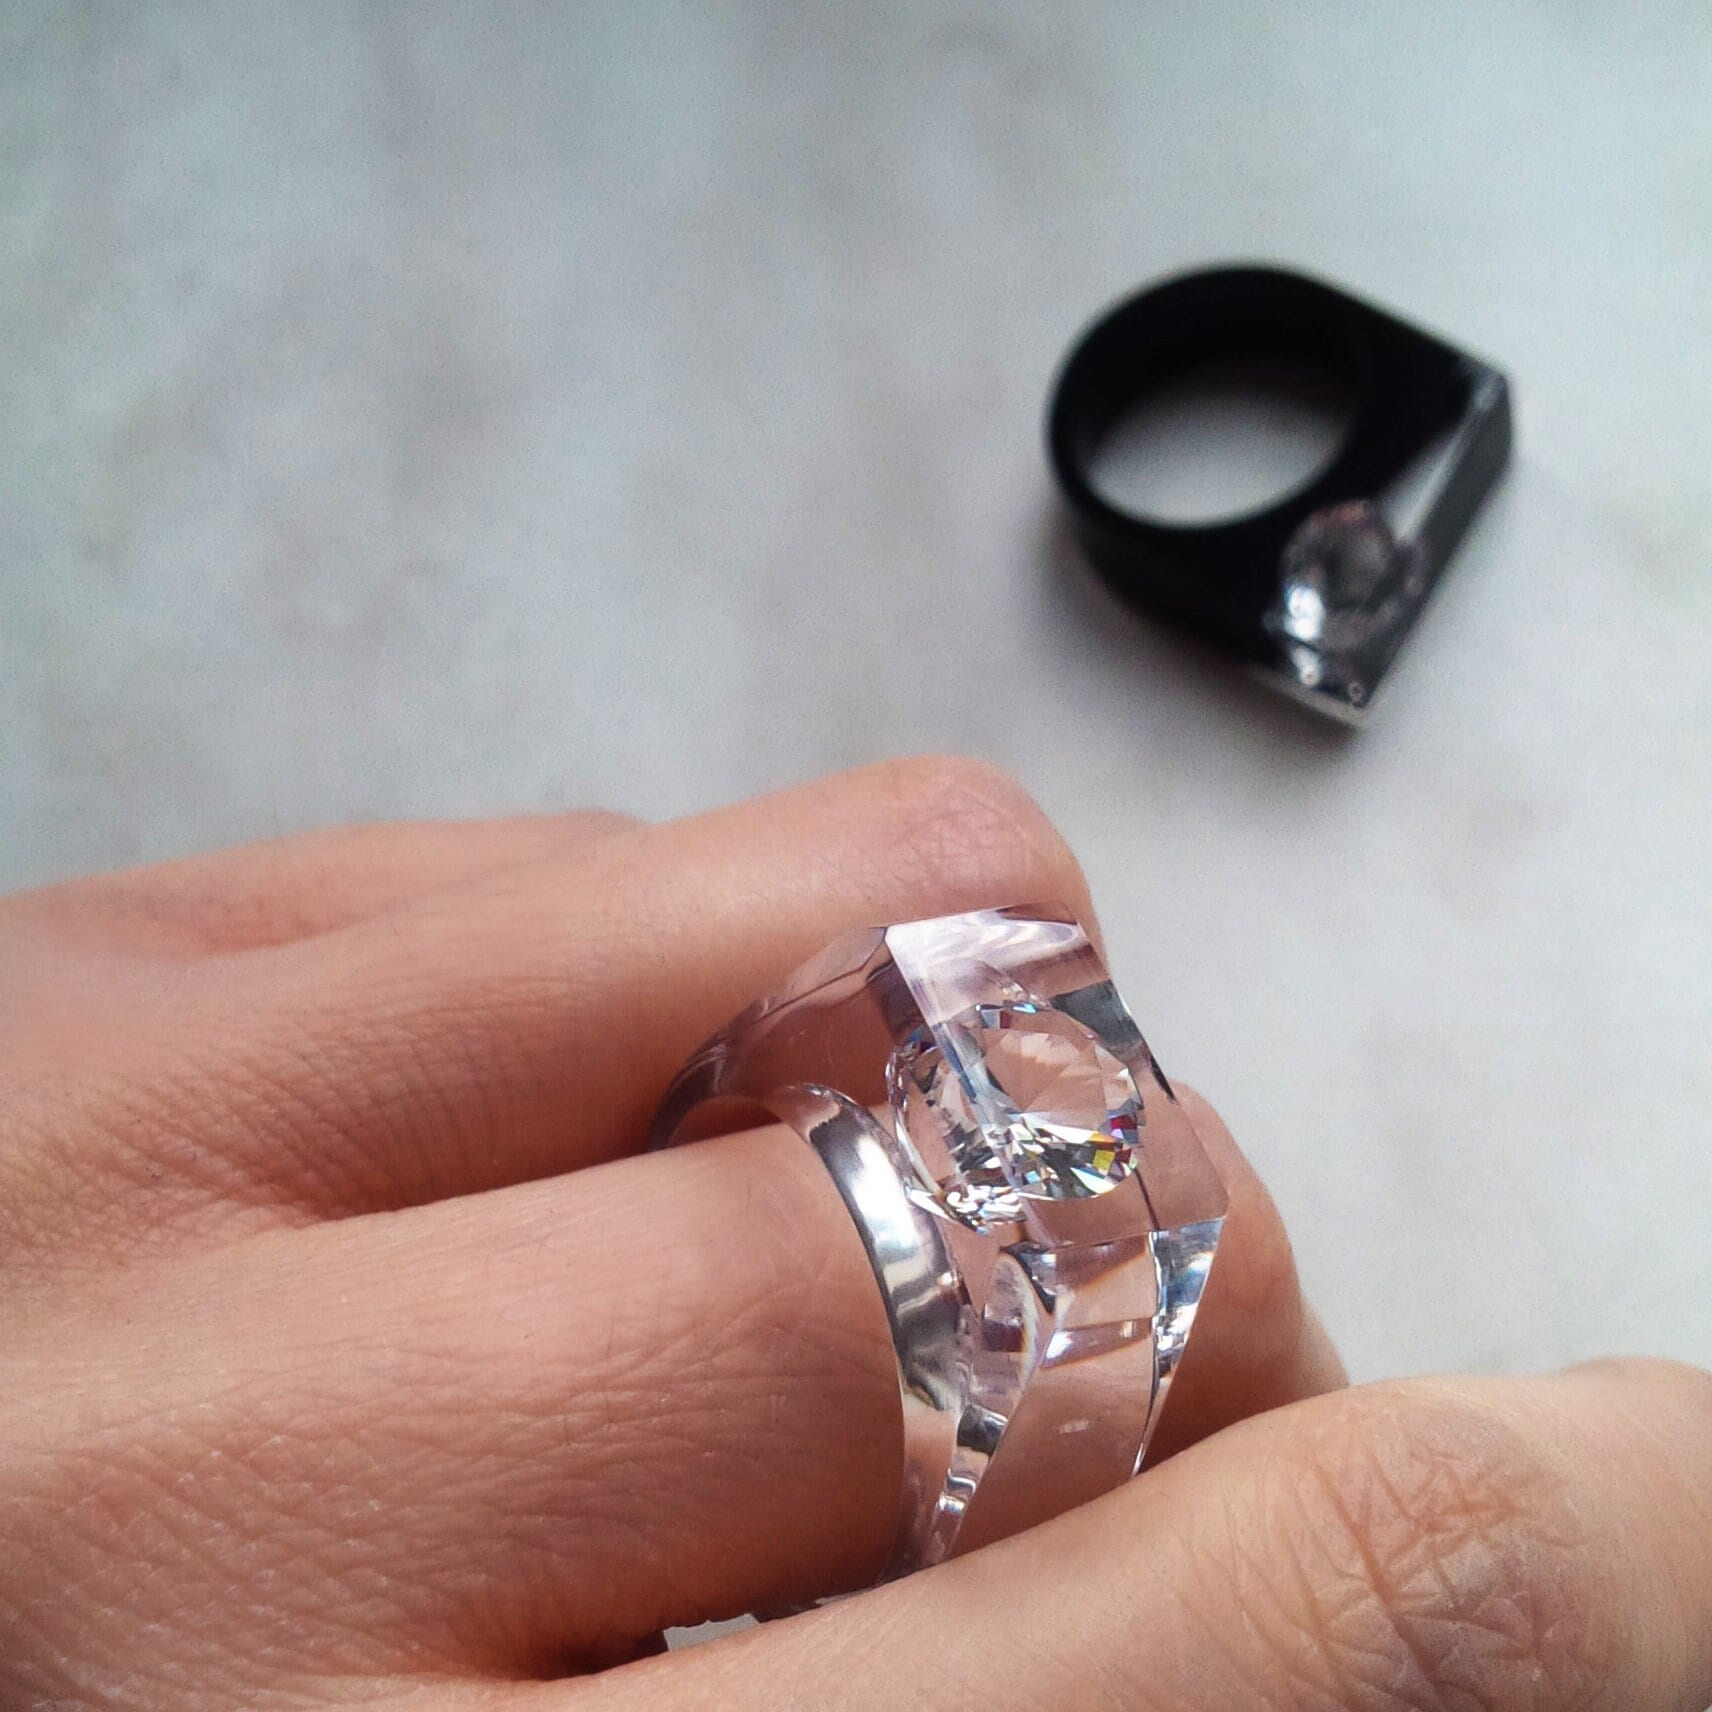 Clear Resin Block Ring Featuring Metallic Gold Accents. - One Size